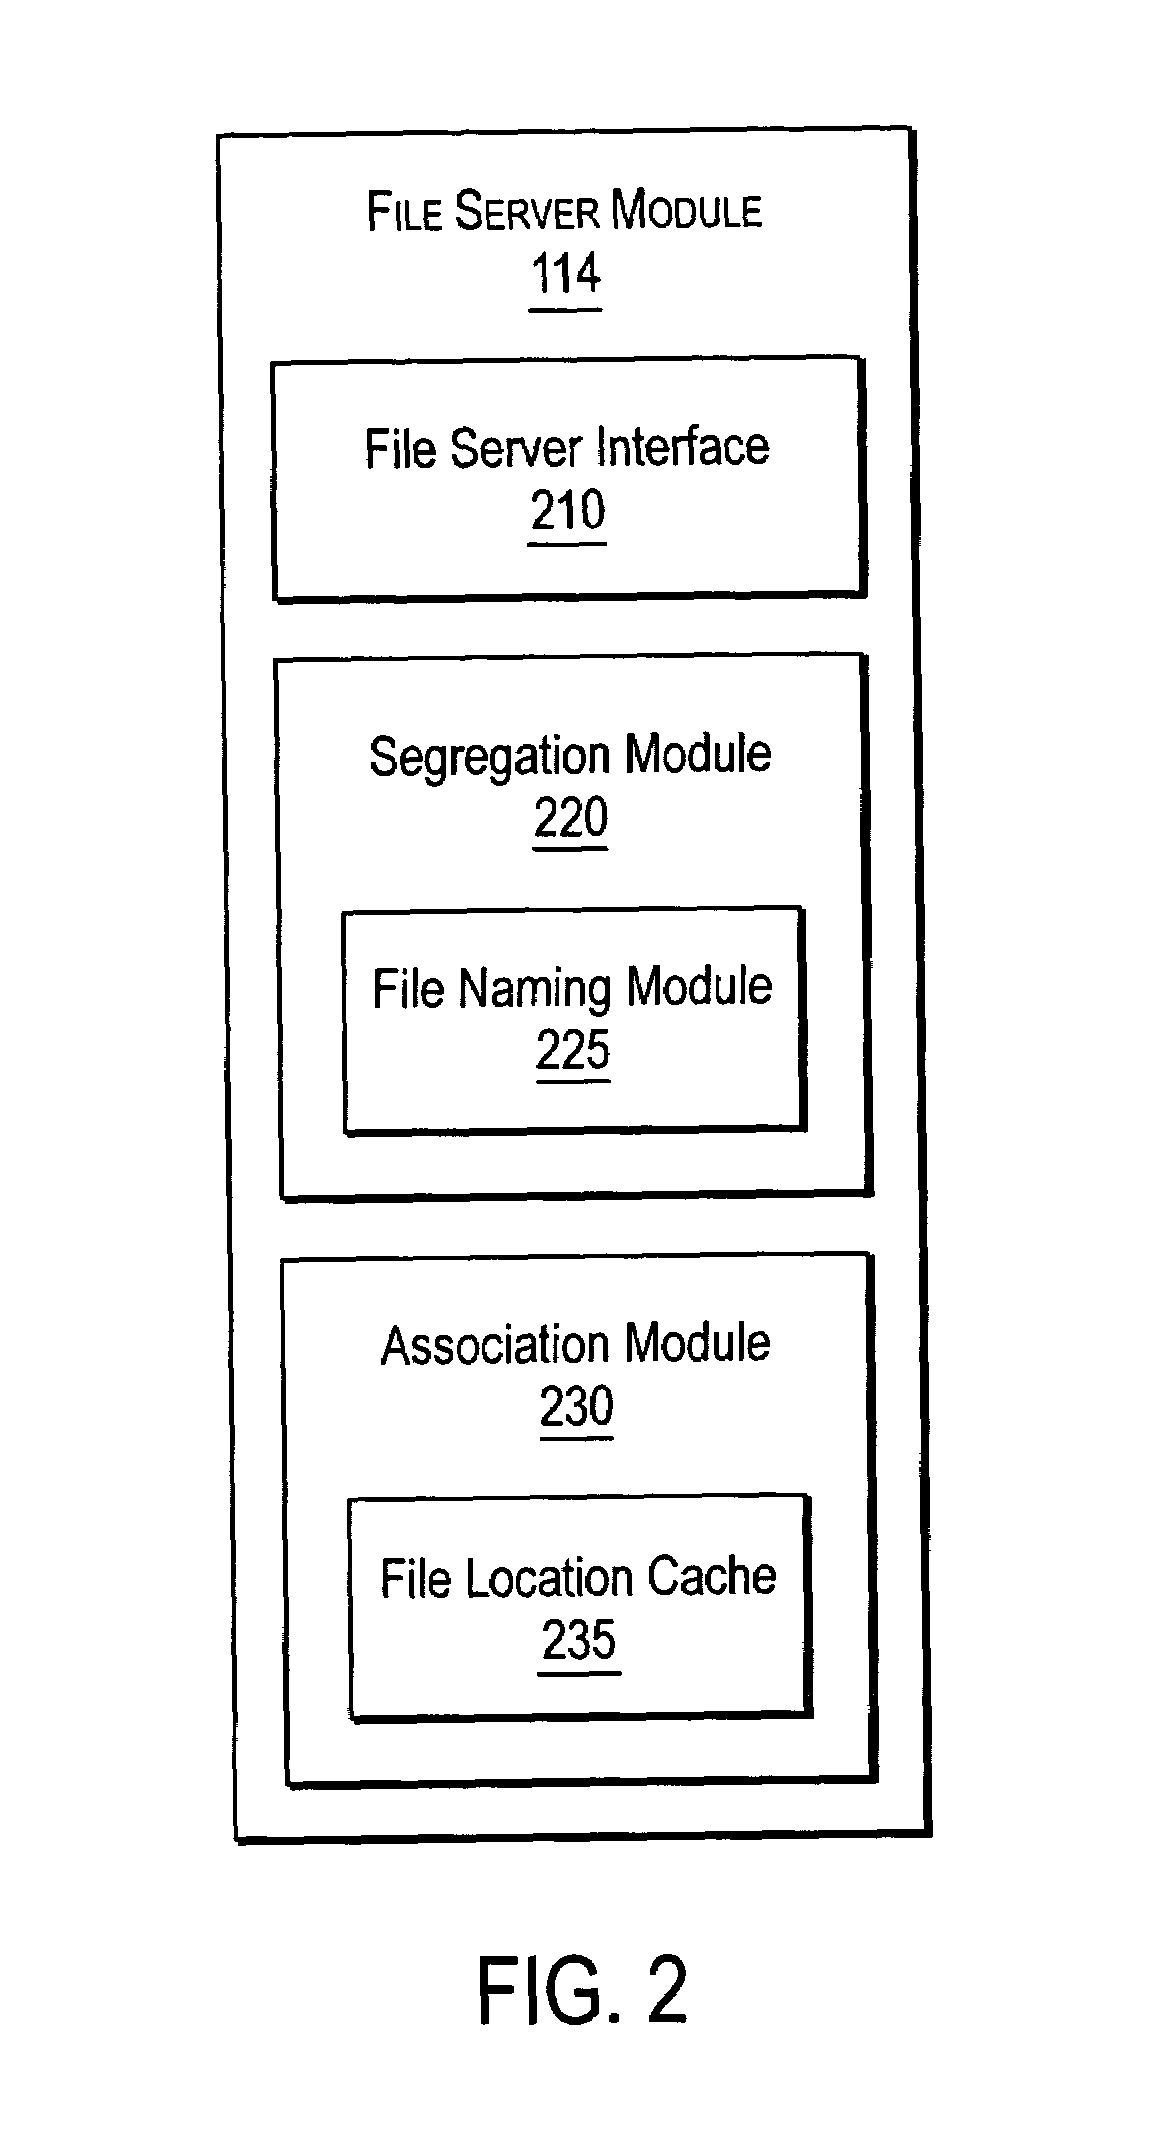 Extended storage capacity for a network file server